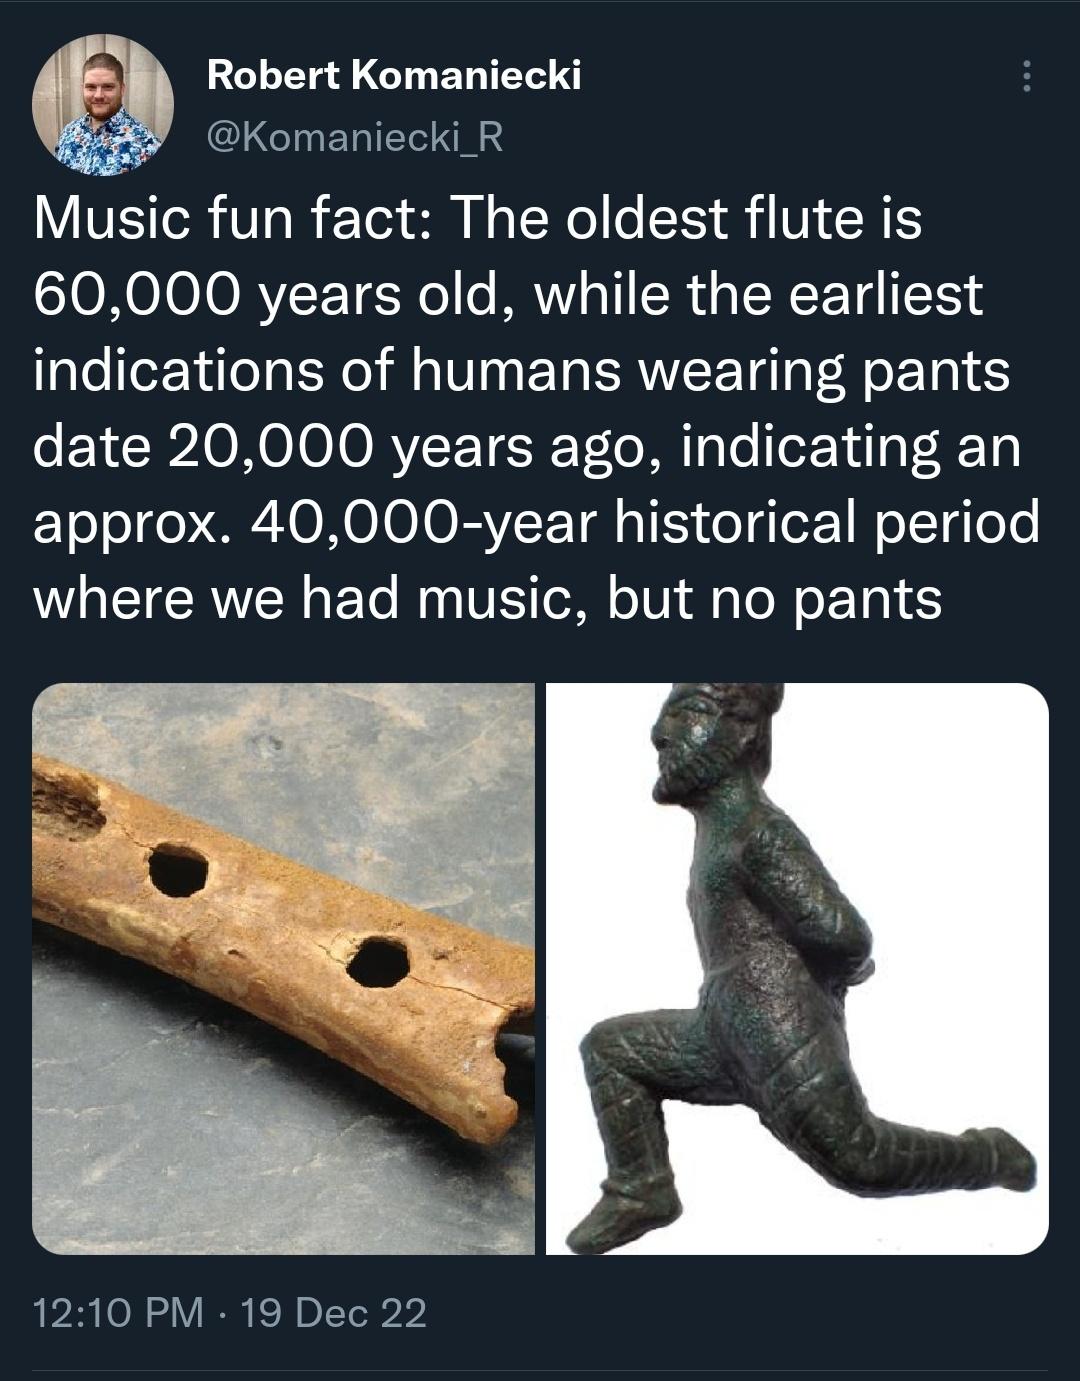 Monday Morning Randomness - flute from divje babe - Robert Komaniecki Music fun fact The oldest flute is 60,000 years old, while the earliest indications of humans wearing pants date 20,000 years ago, indicating an approx. 40,000year historical period whe